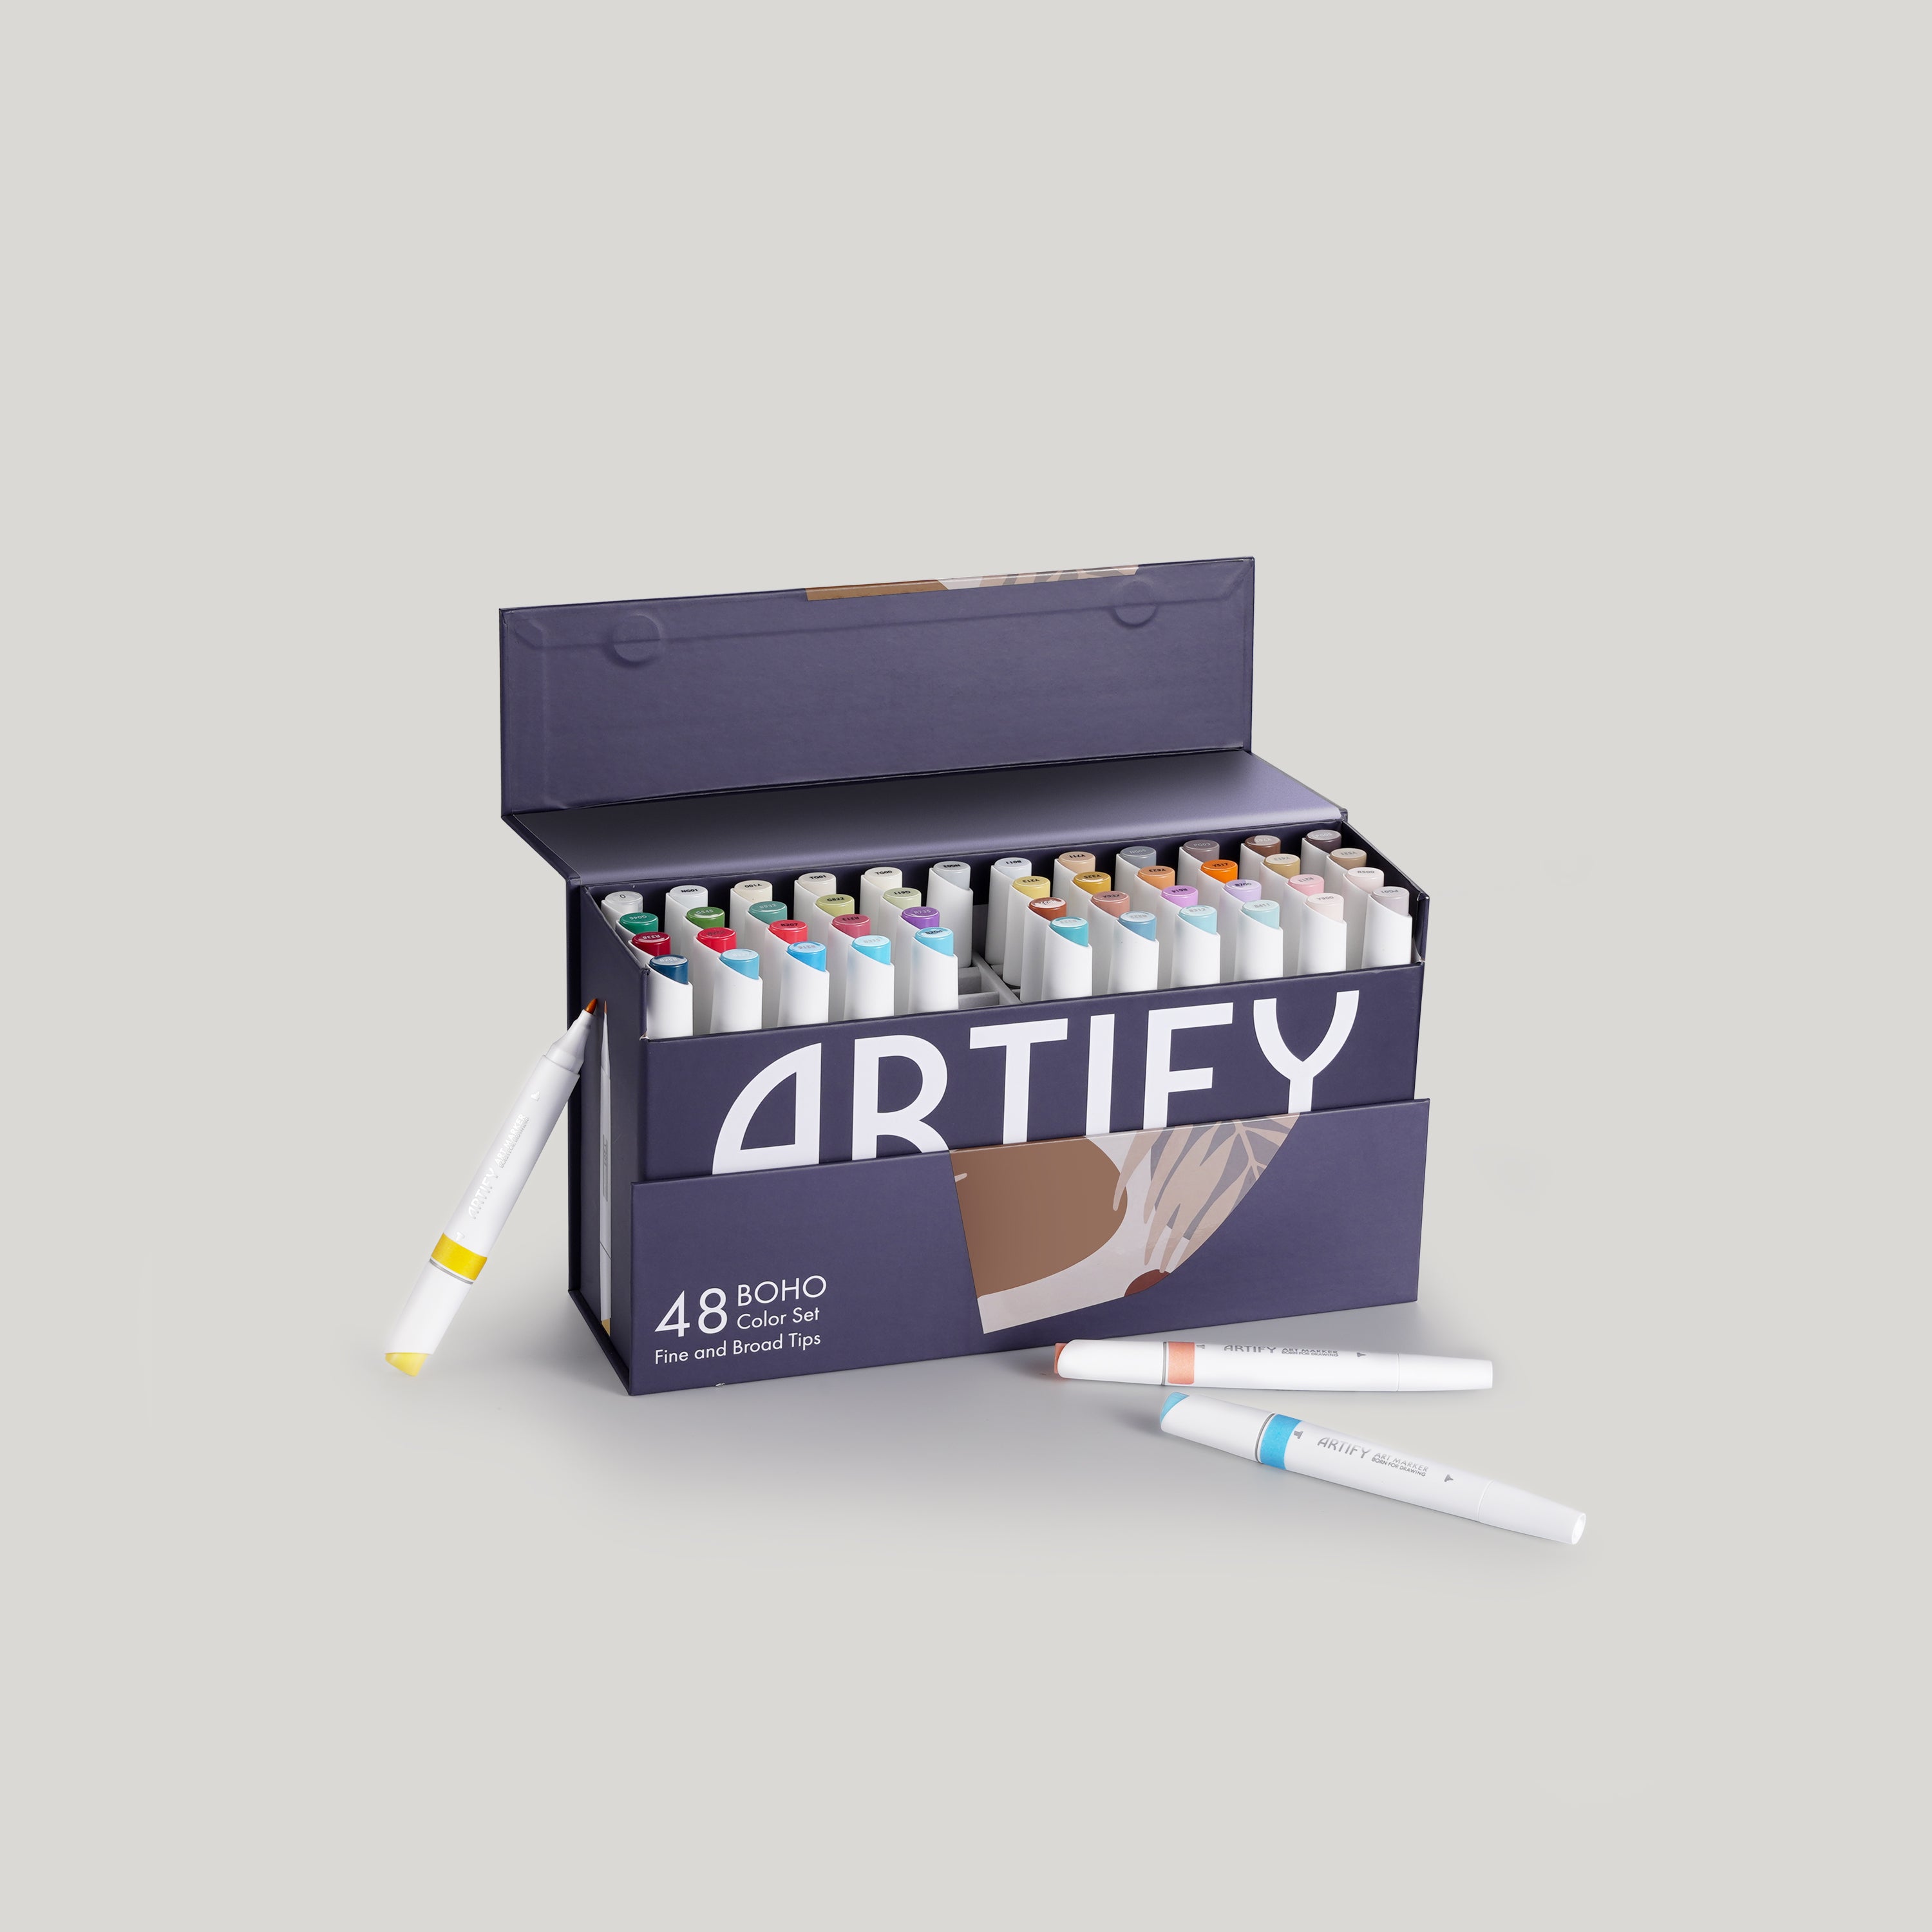 NEW Artify Art Markers - Boho Colors - set of 48 